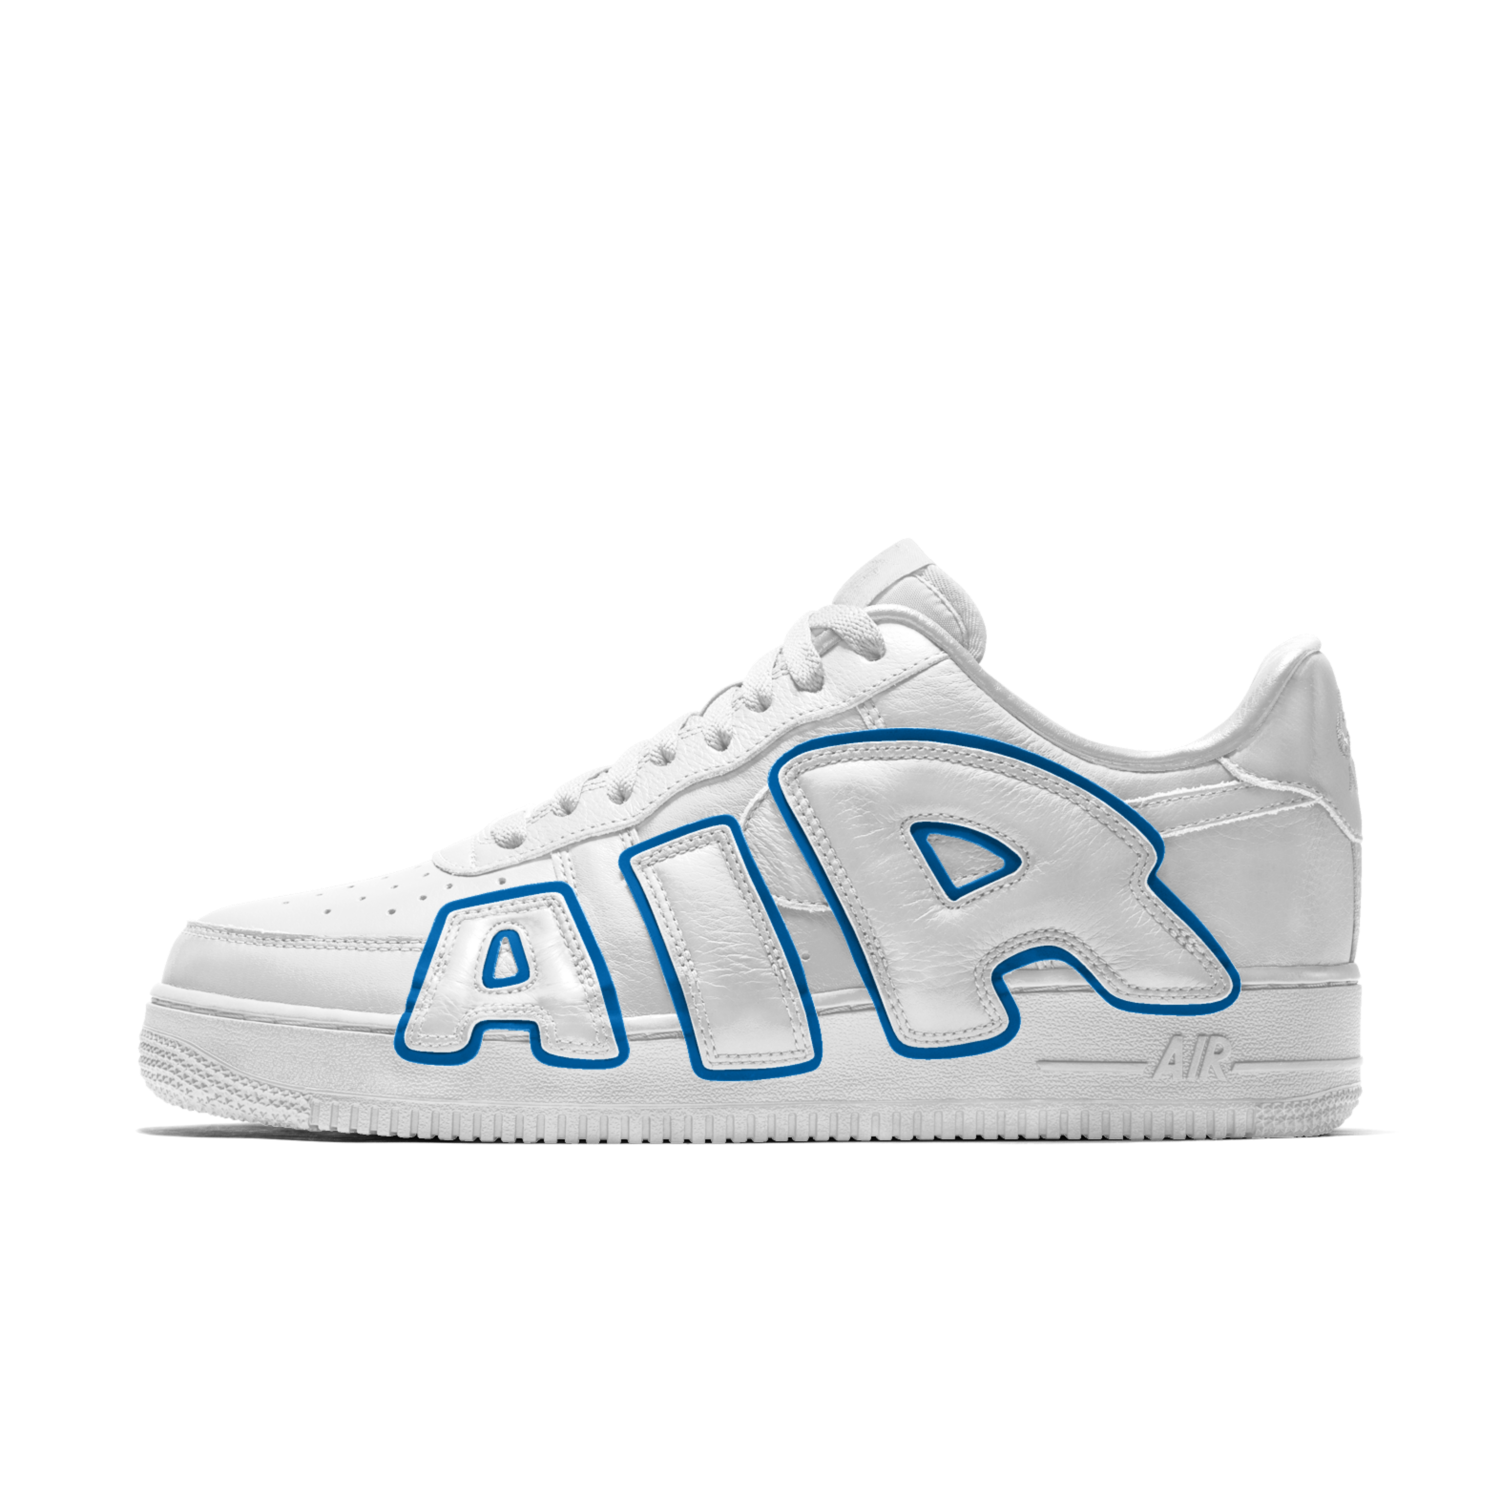 Cpfm Air Force 1 Shop, 50% OFF | lagence.tv